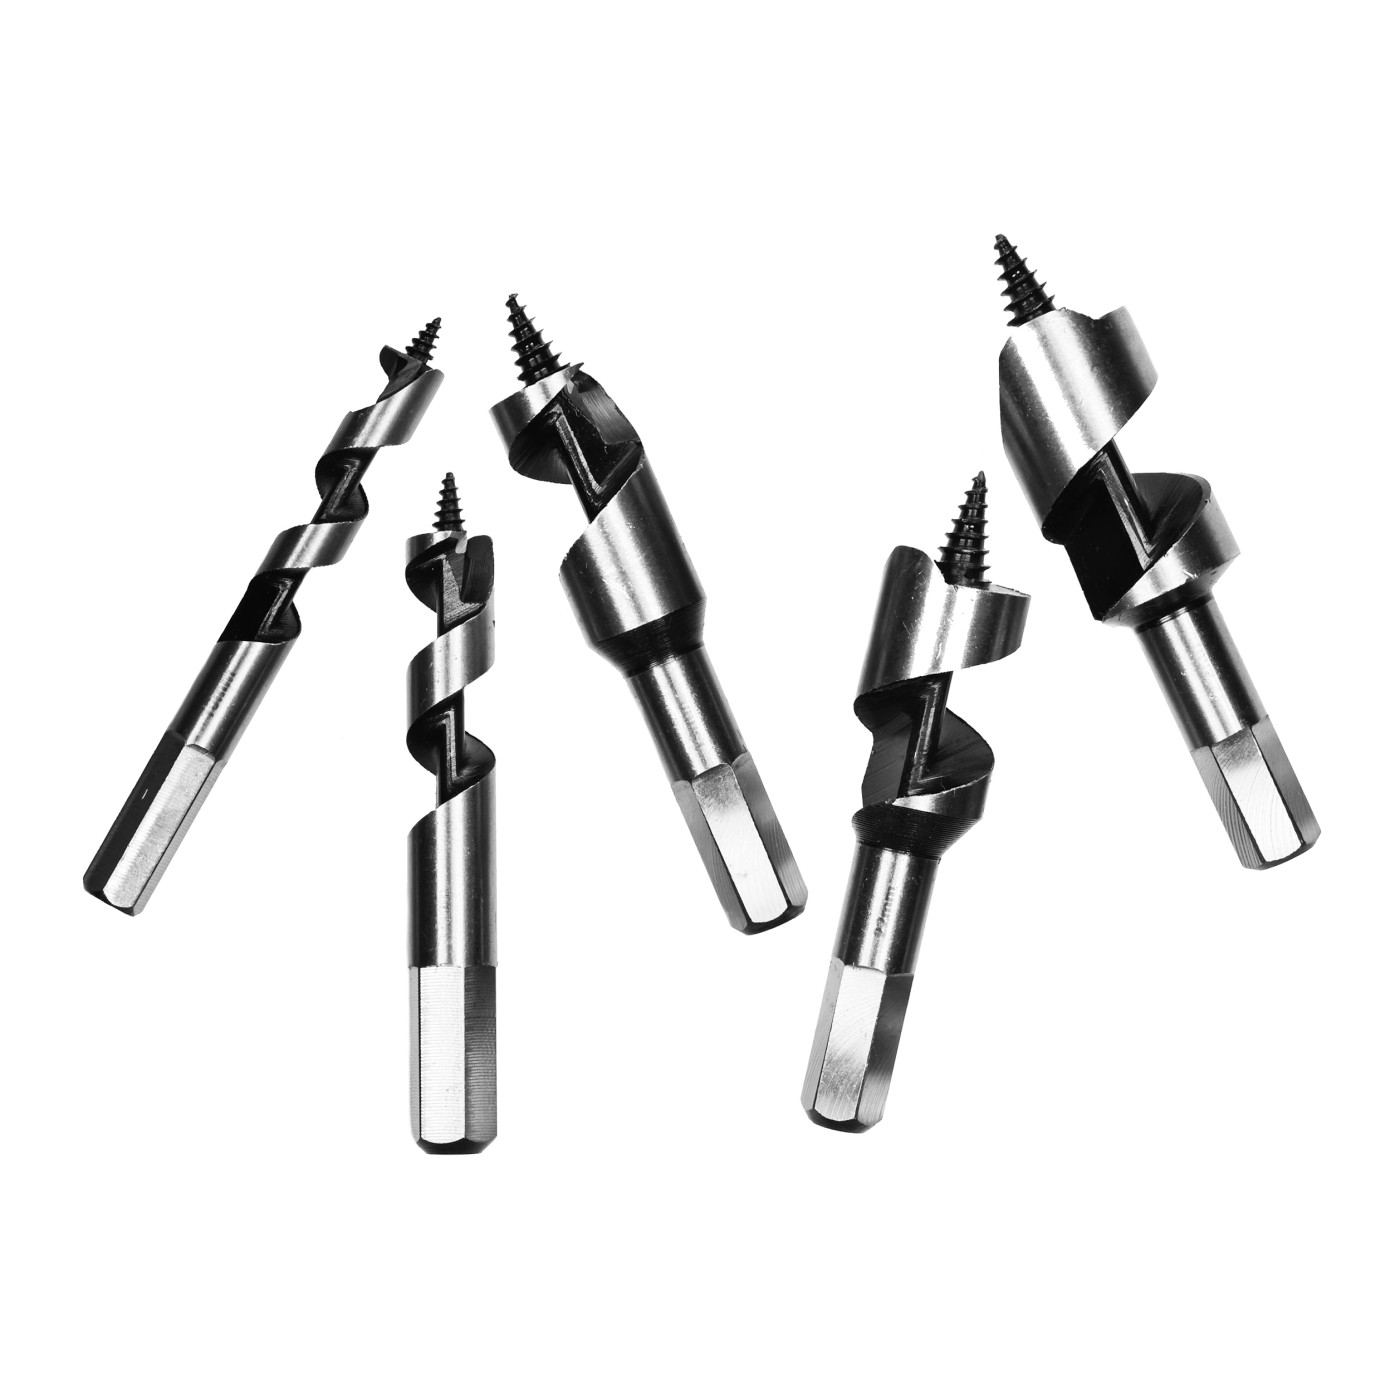 Set of 5 short auger drill bits (10, 13, 19, 22 and 25 mm, 10